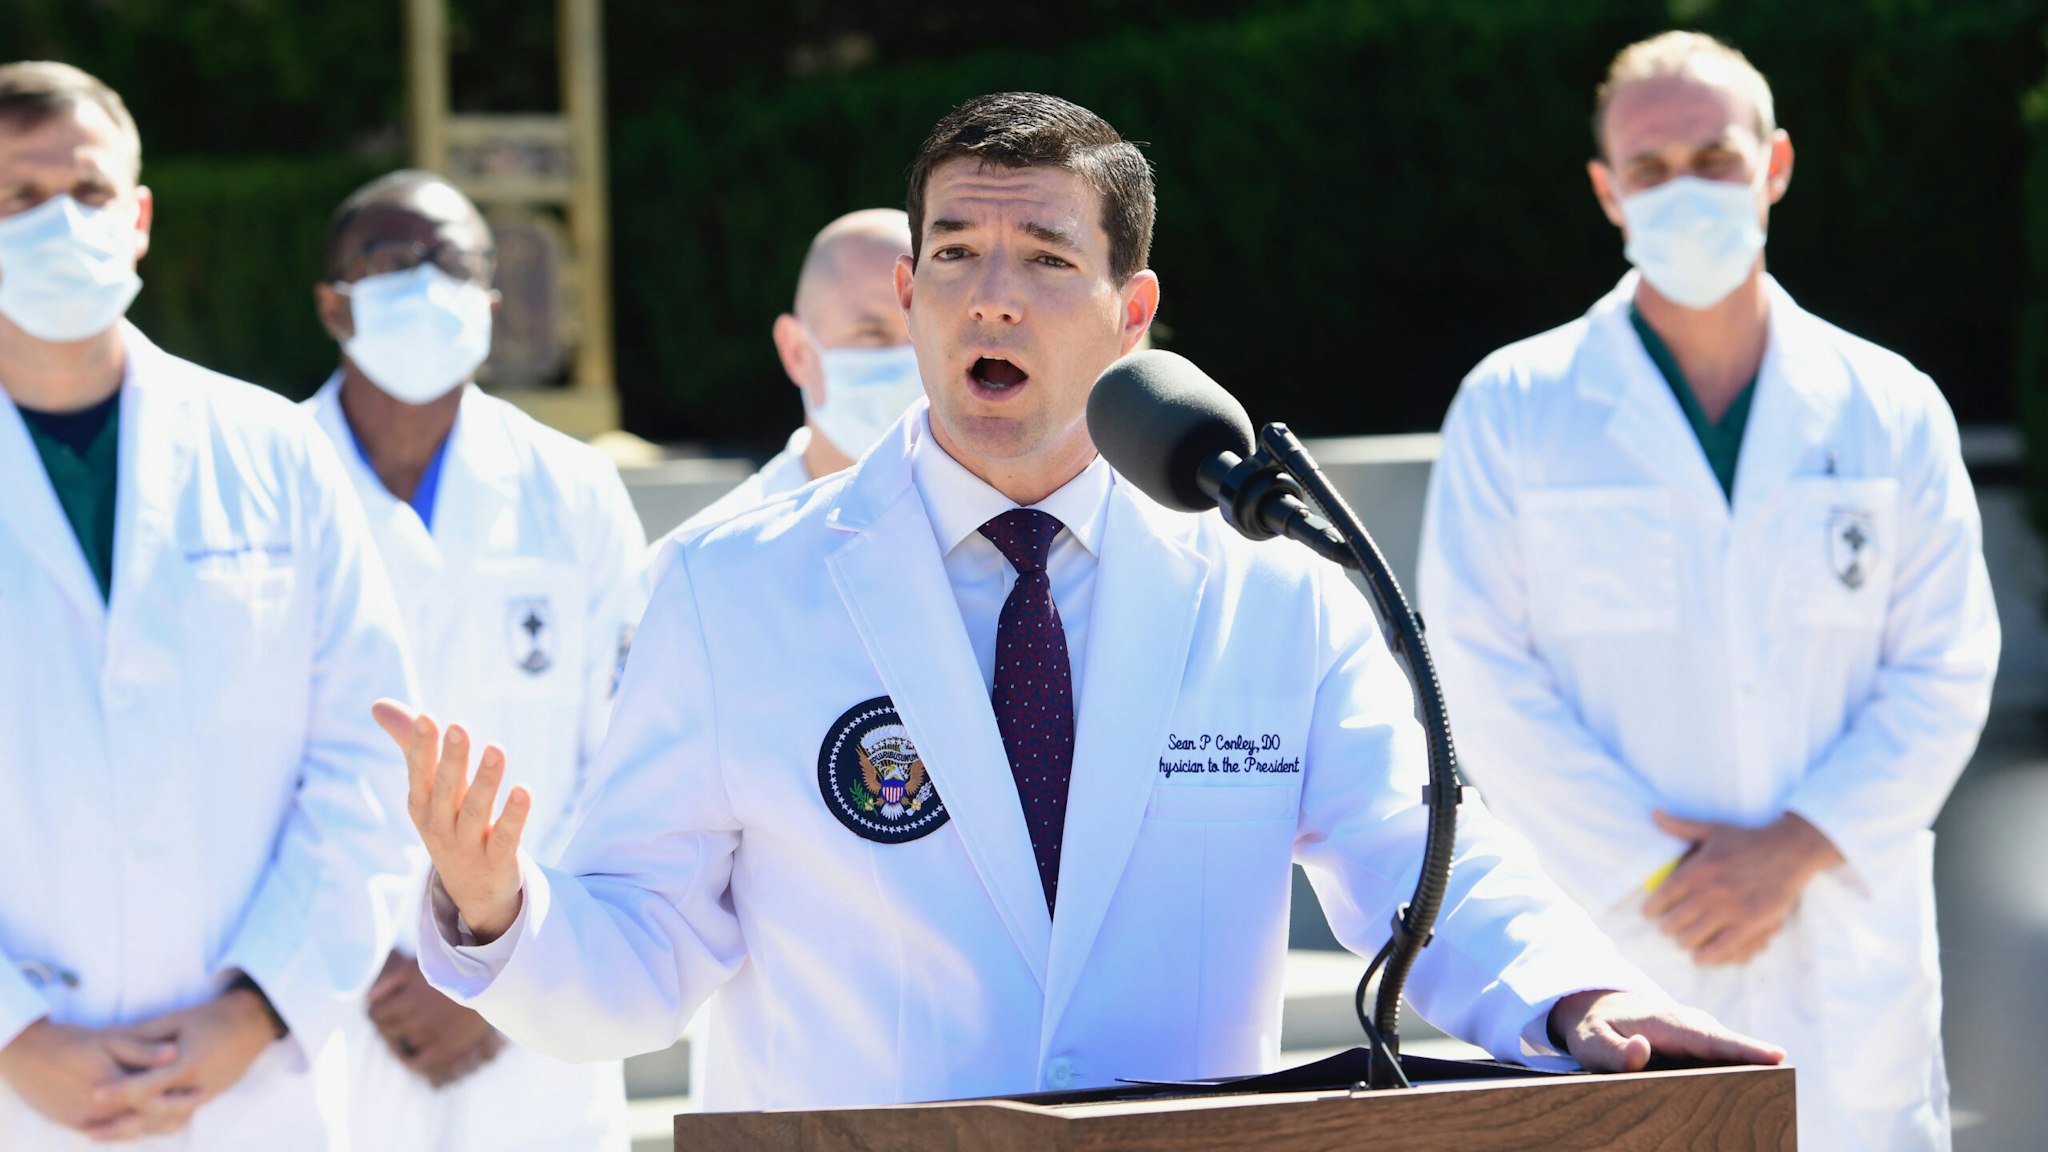 Dr. Sean Conley, White House physician, speaks during a press conference outside of Walter Reed National Military Medical Center in Bethesda, Maryland, U.S., on Saturday, Oct. 3, 2020. Dr. Conley said the president is "doing very well" and his condition is improving while being treated at the U.S. military hospital near Washington for Covid-19.